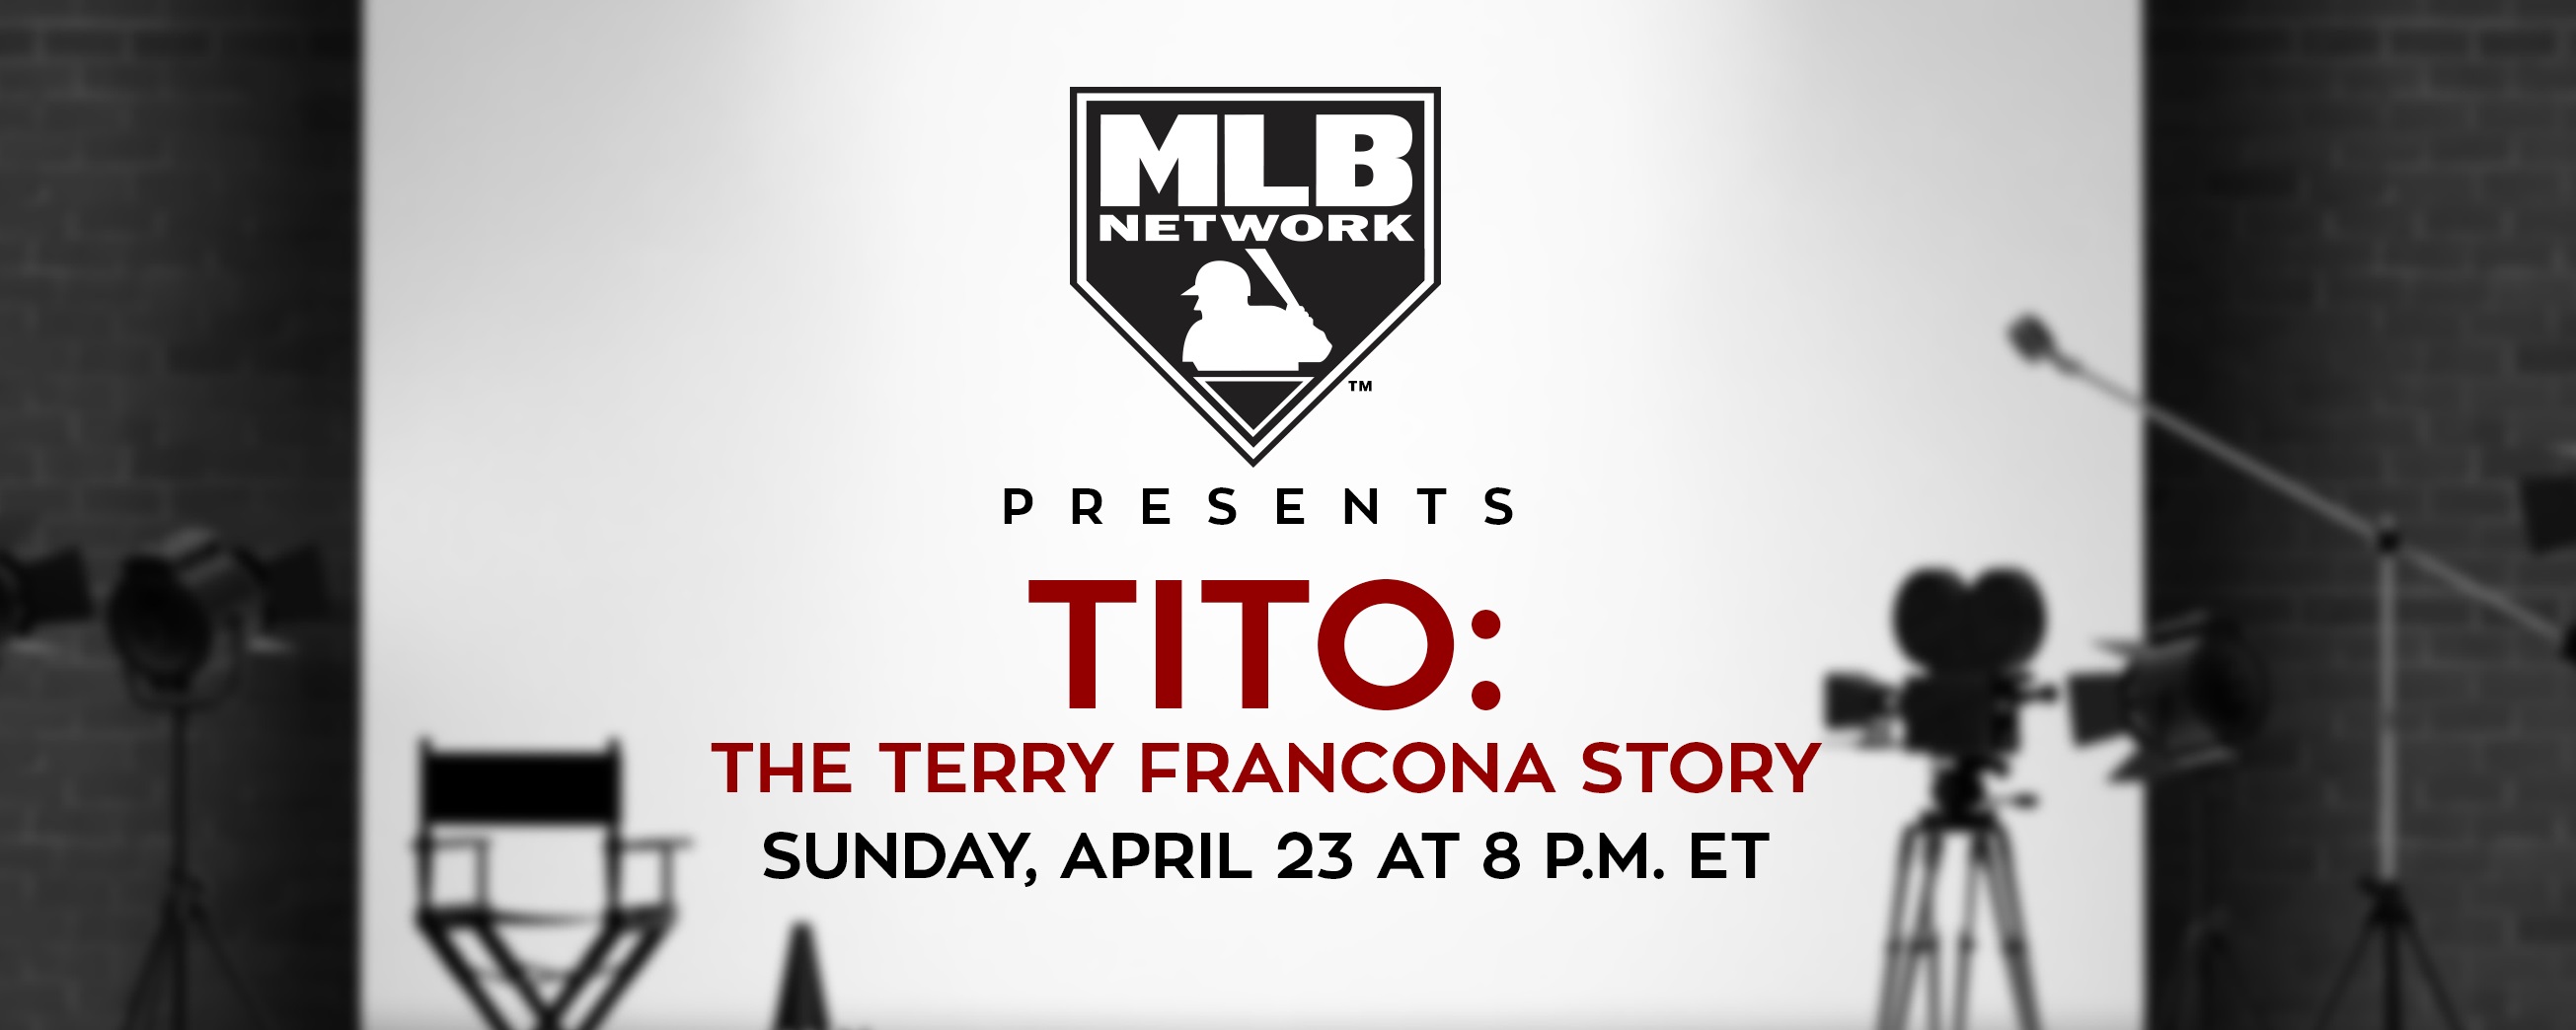 Terry Francona doc reveals naked truth about his life in baseball National  News - Bally Sports